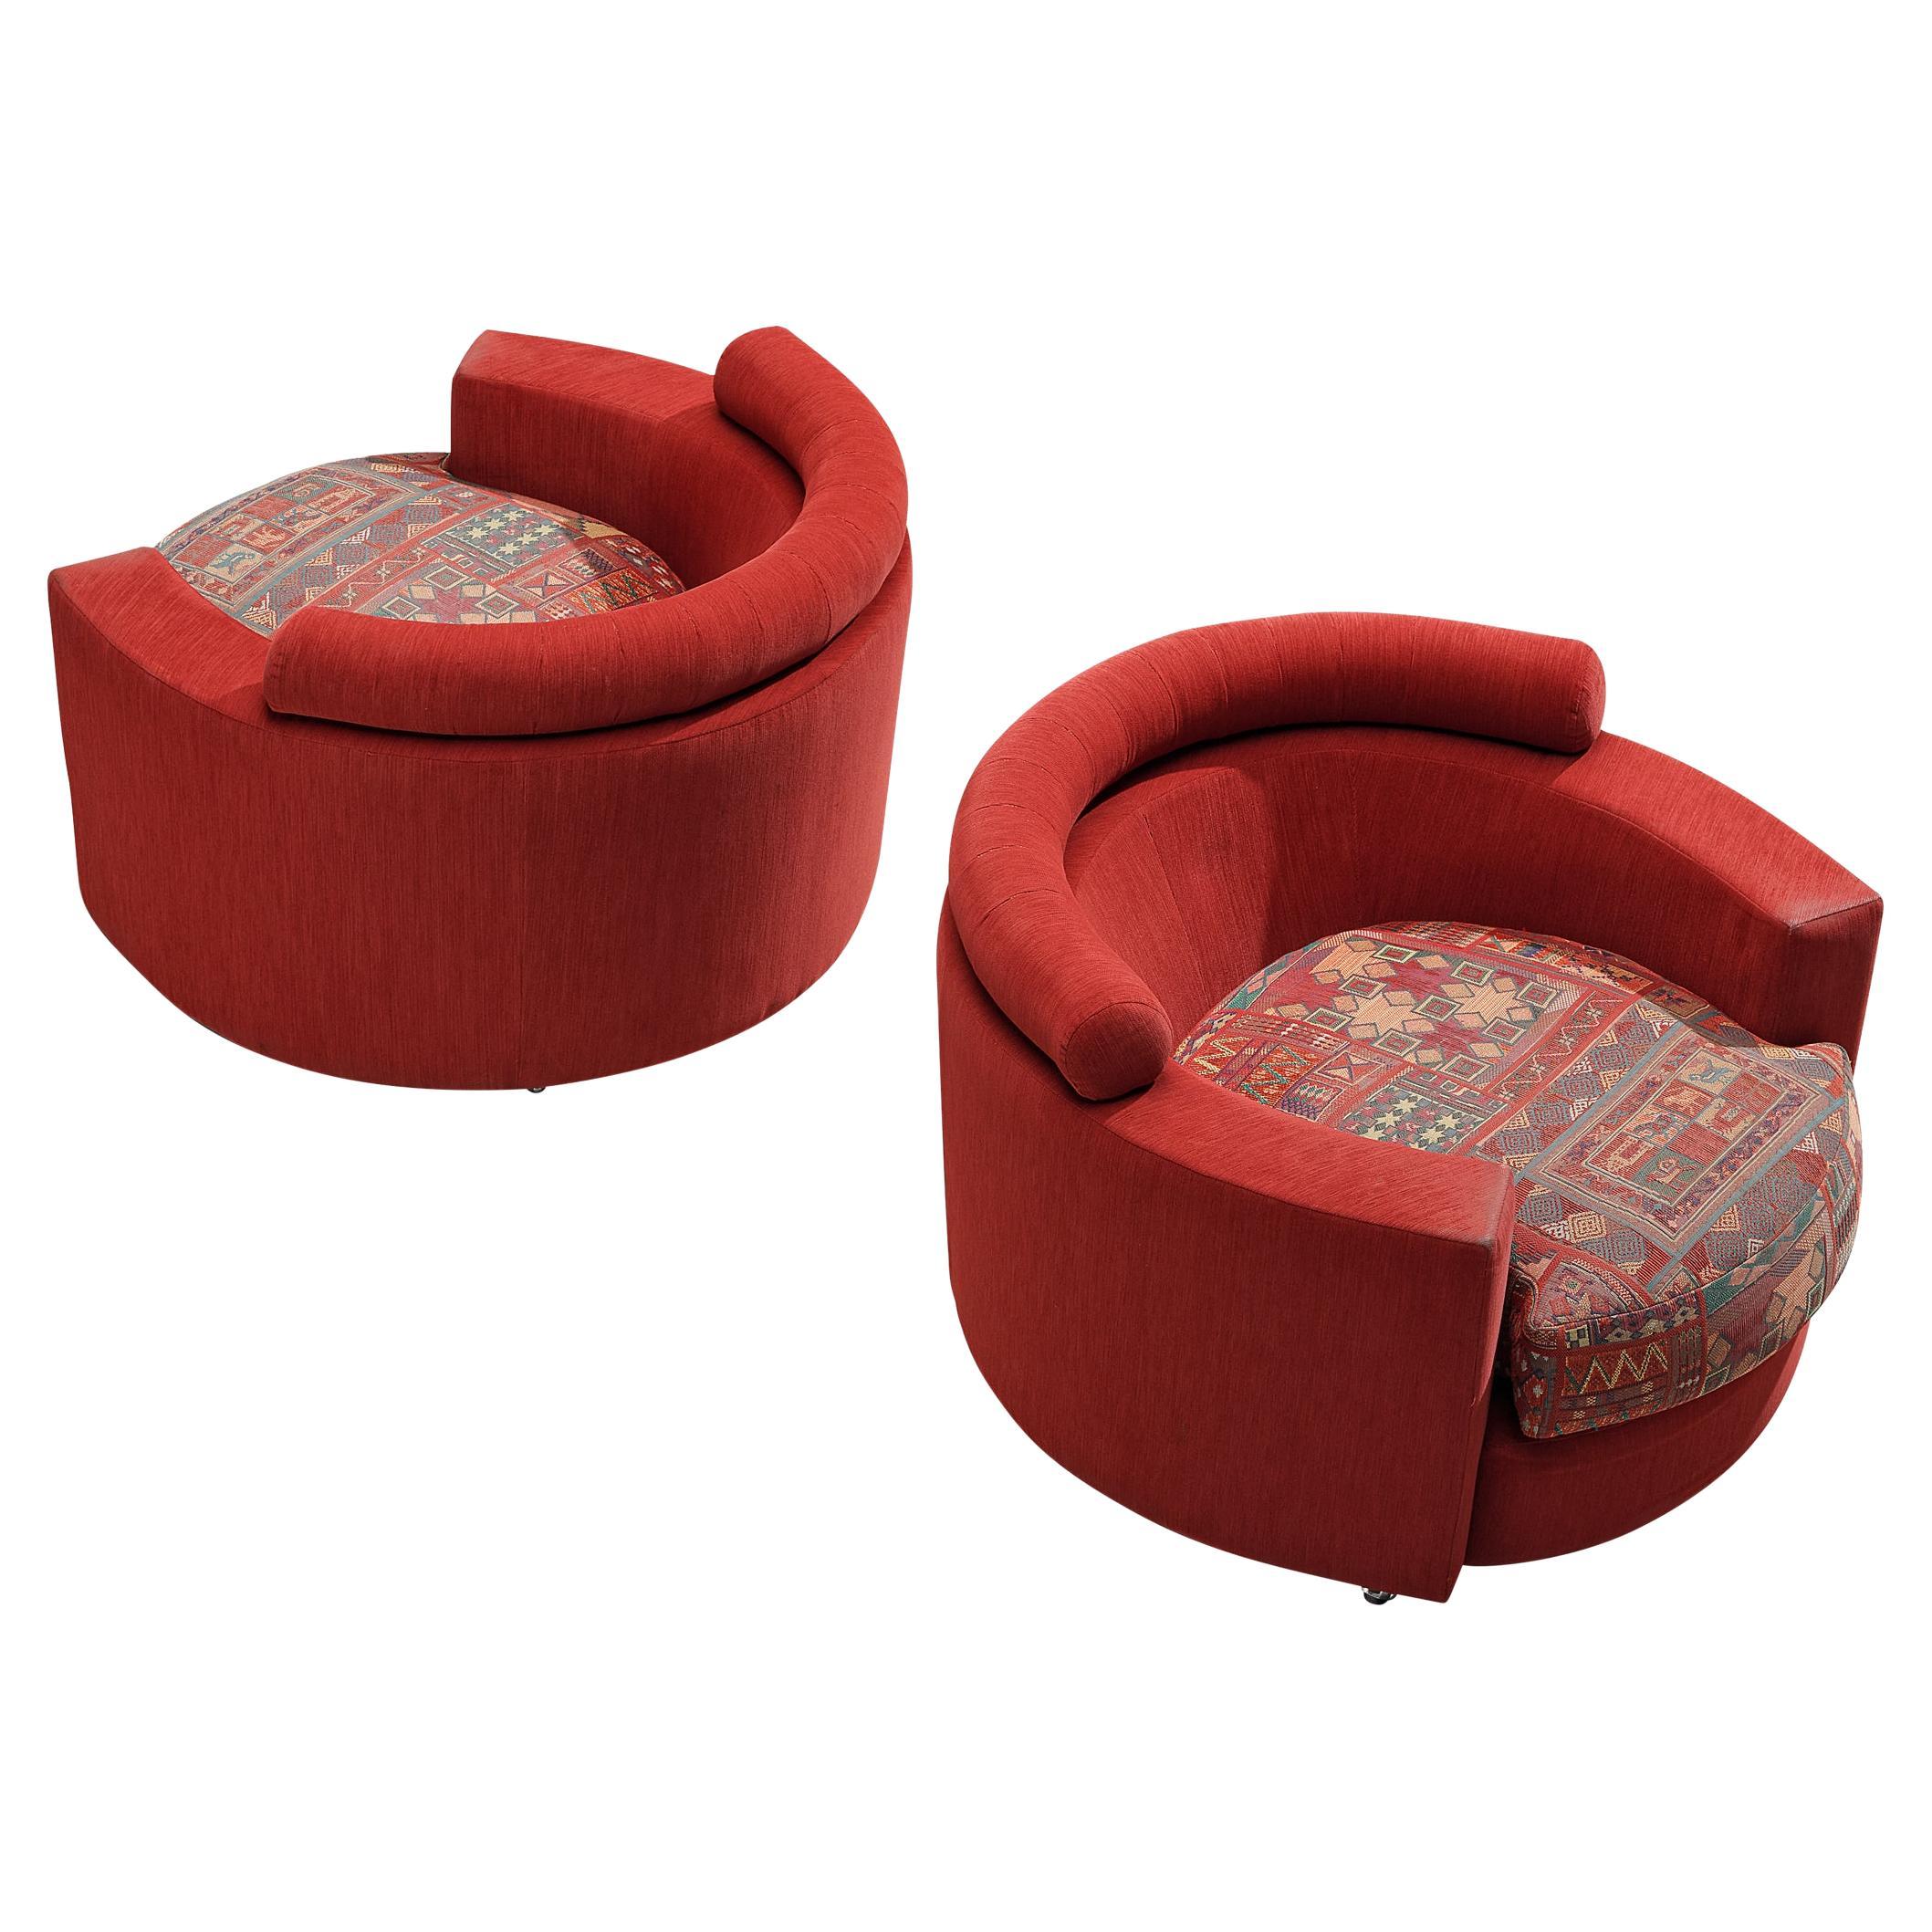 Roche Bobois Pair of Lounge Chairs in Red and Patterned Upholstery For Sale